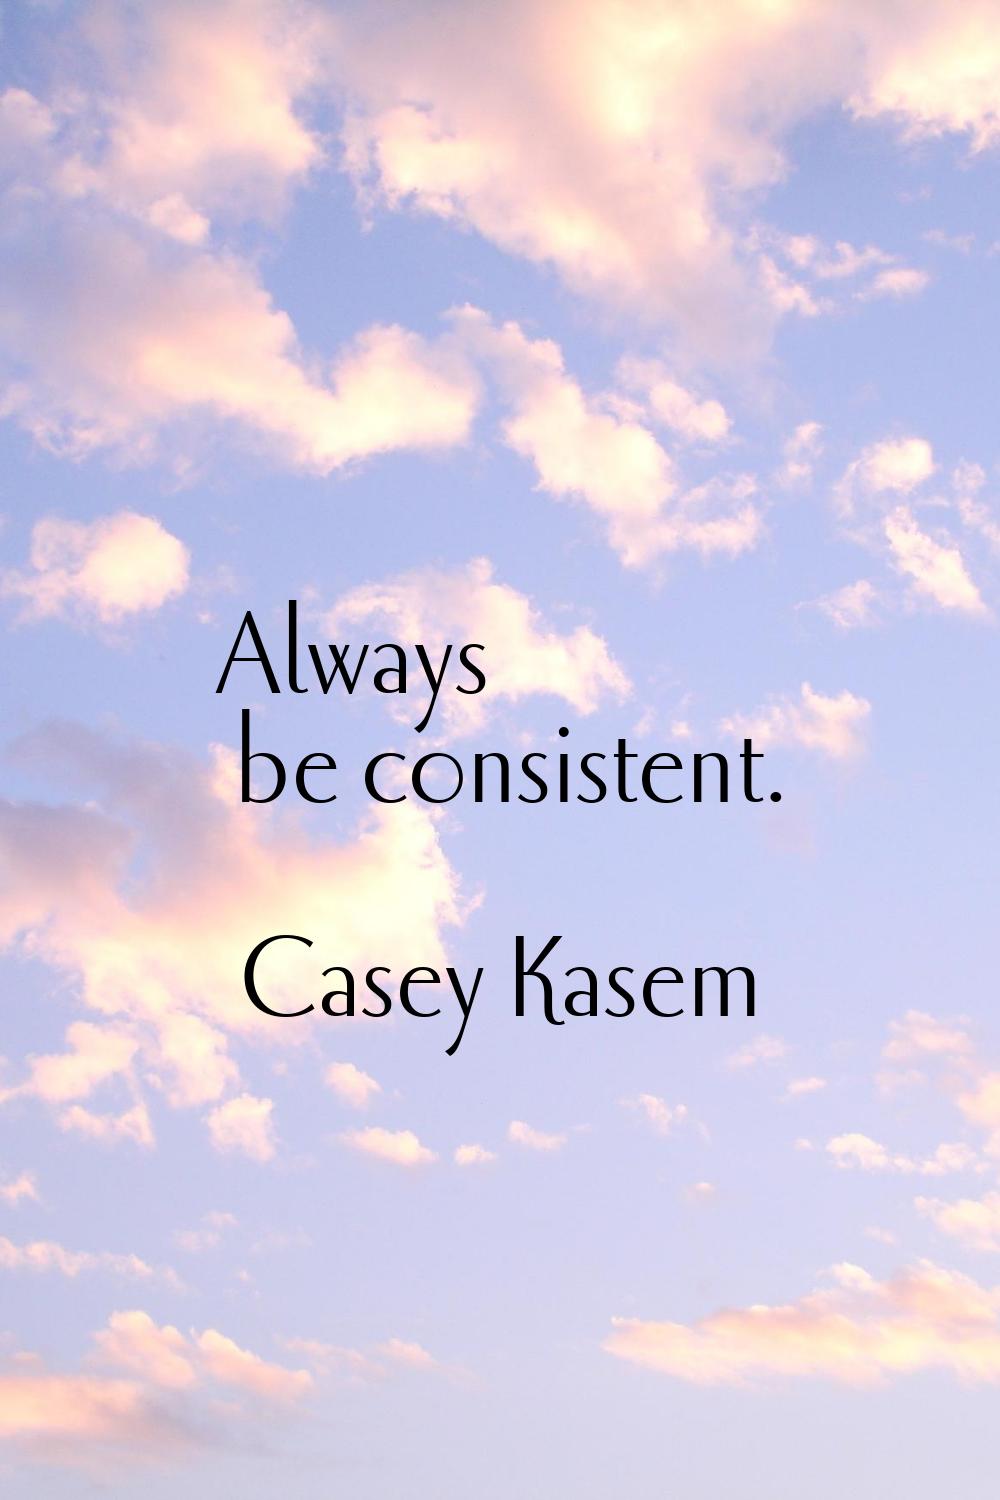 Always be consistent.